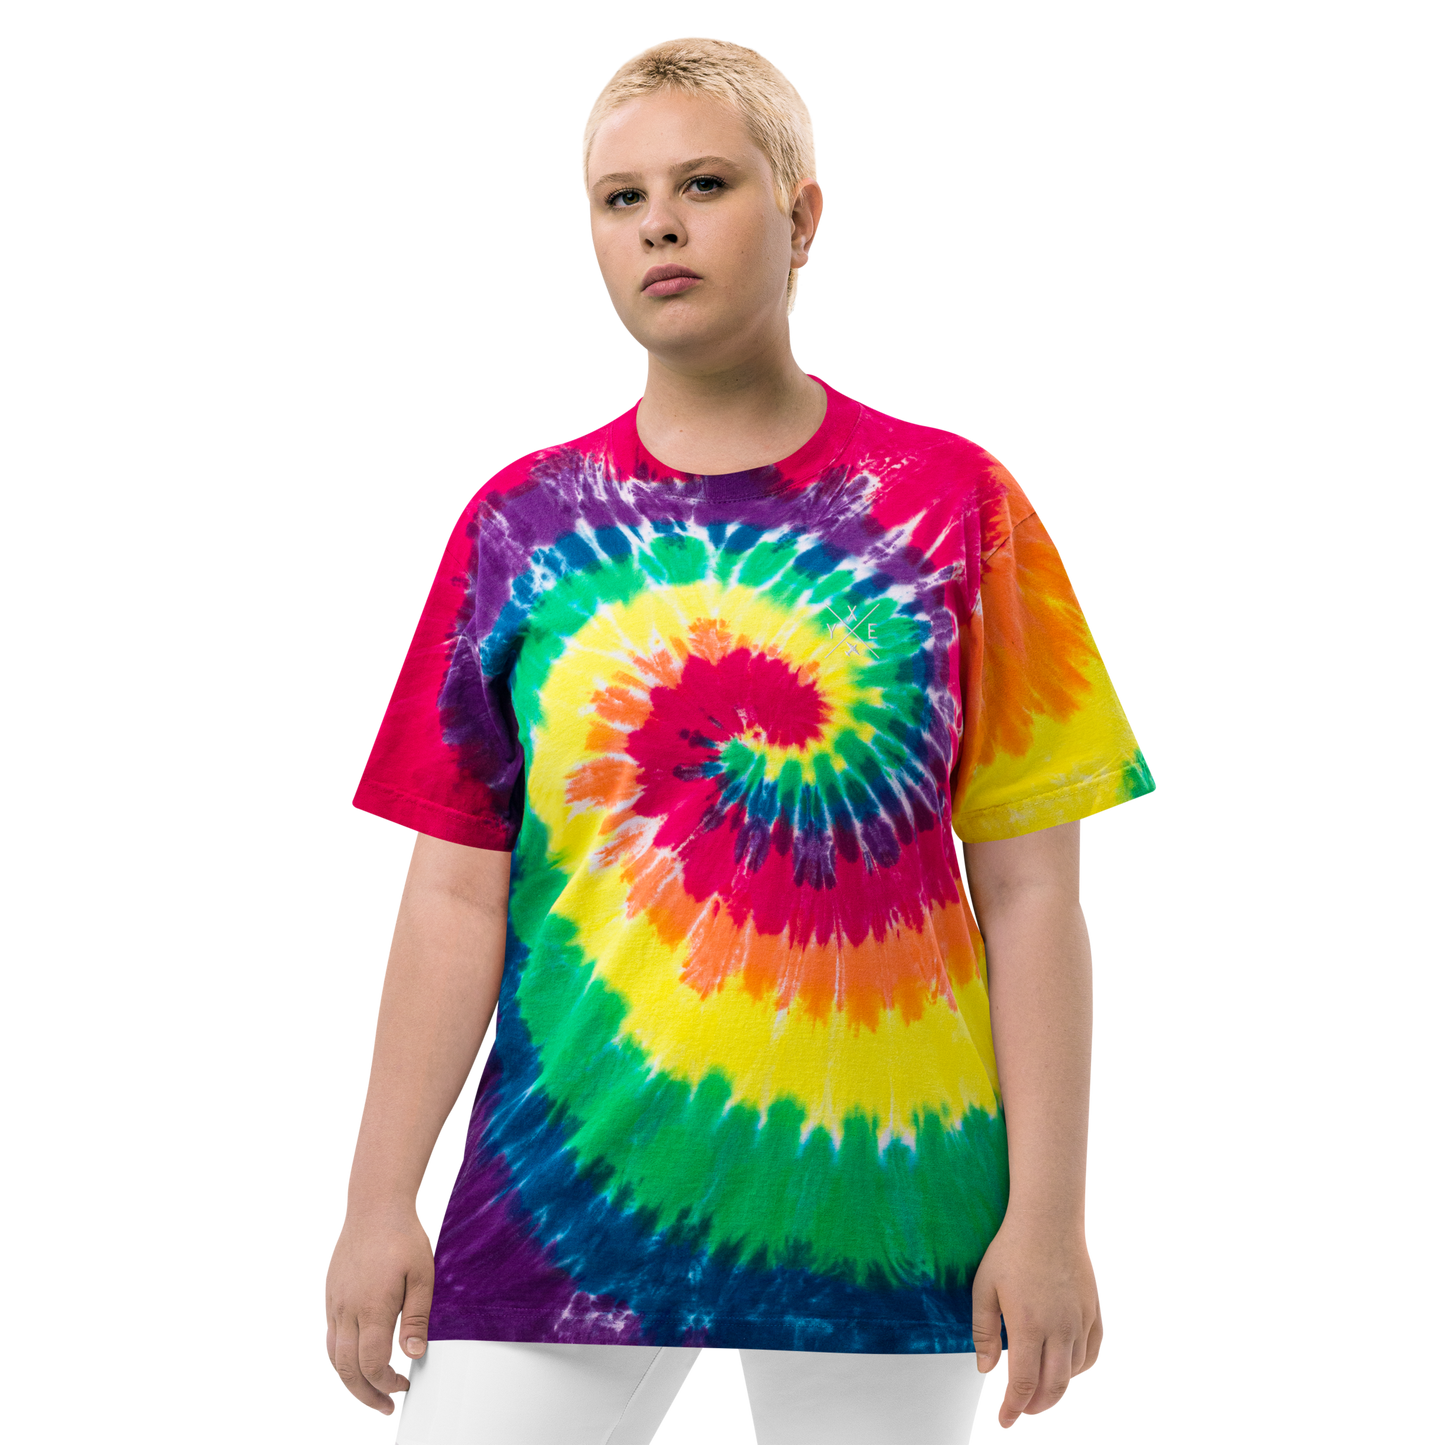 YHM Designs - YXE Saskatoon Oversized Tie-Dye T-Shirt - Crossed-X Design with Airport Code and Vintage Propliner - White Embroidery - Image 01